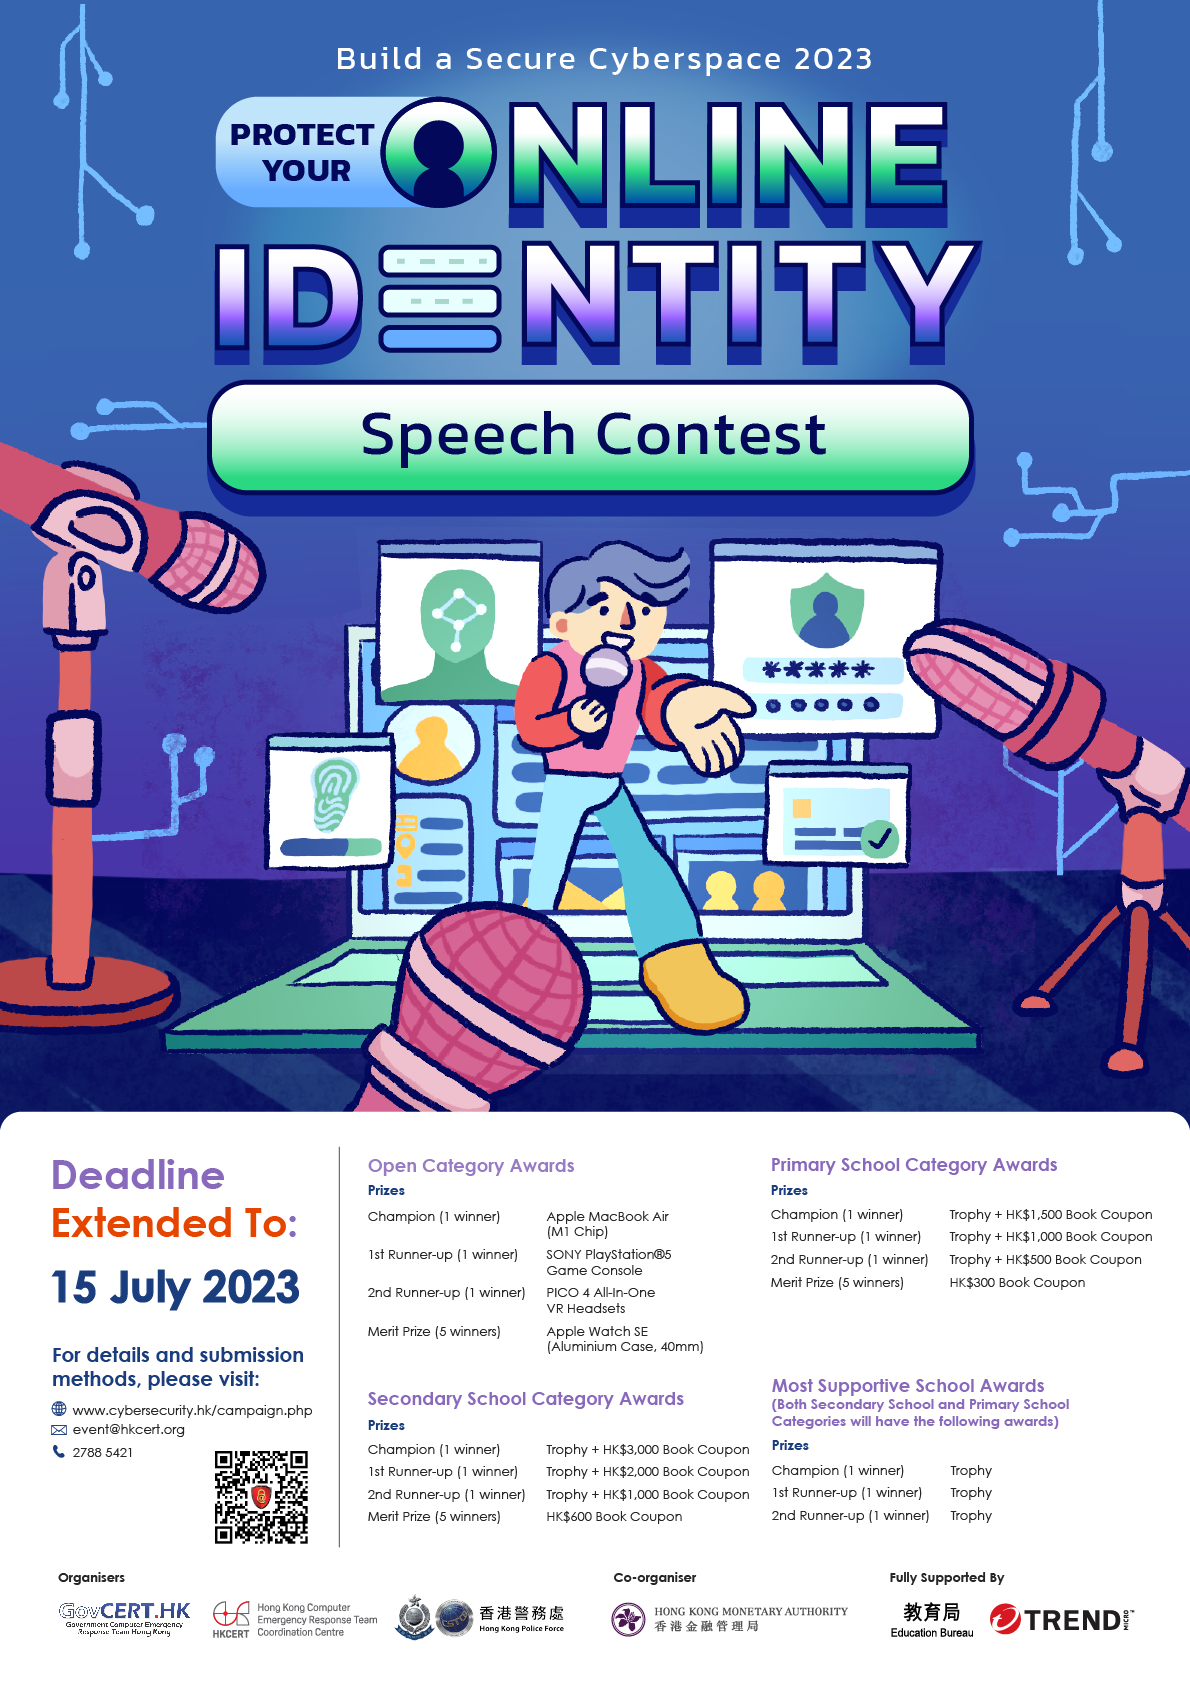 “Protect Your Online Identity” Speech Contest